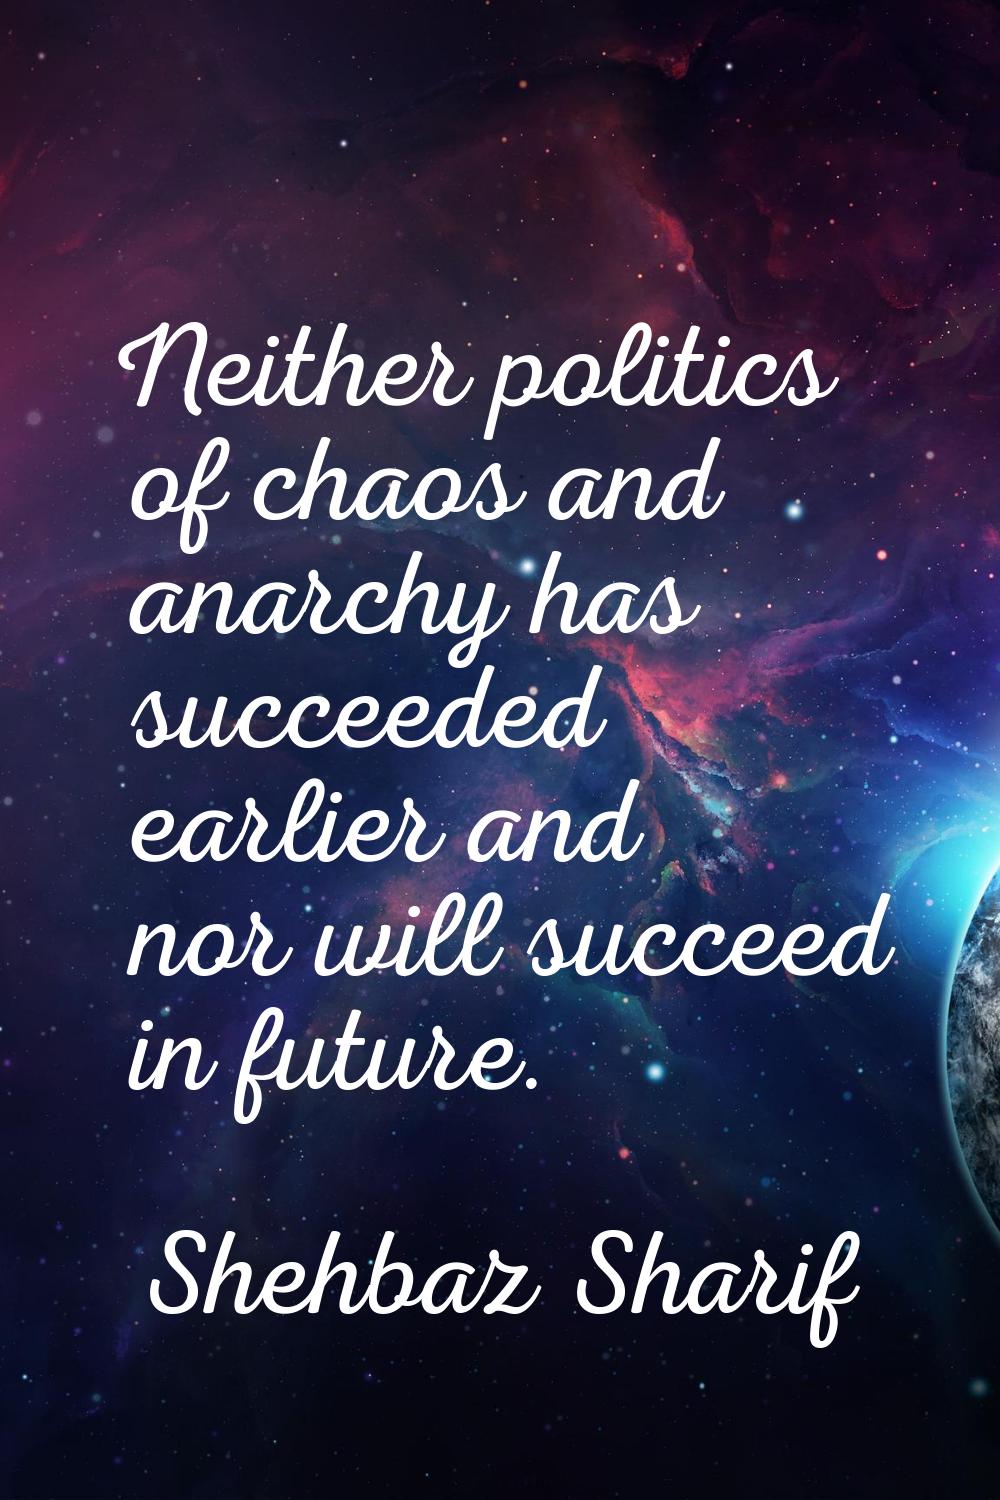 Neither politics of chaos and anarchy has succeeded earlier and nor will succeed in future.